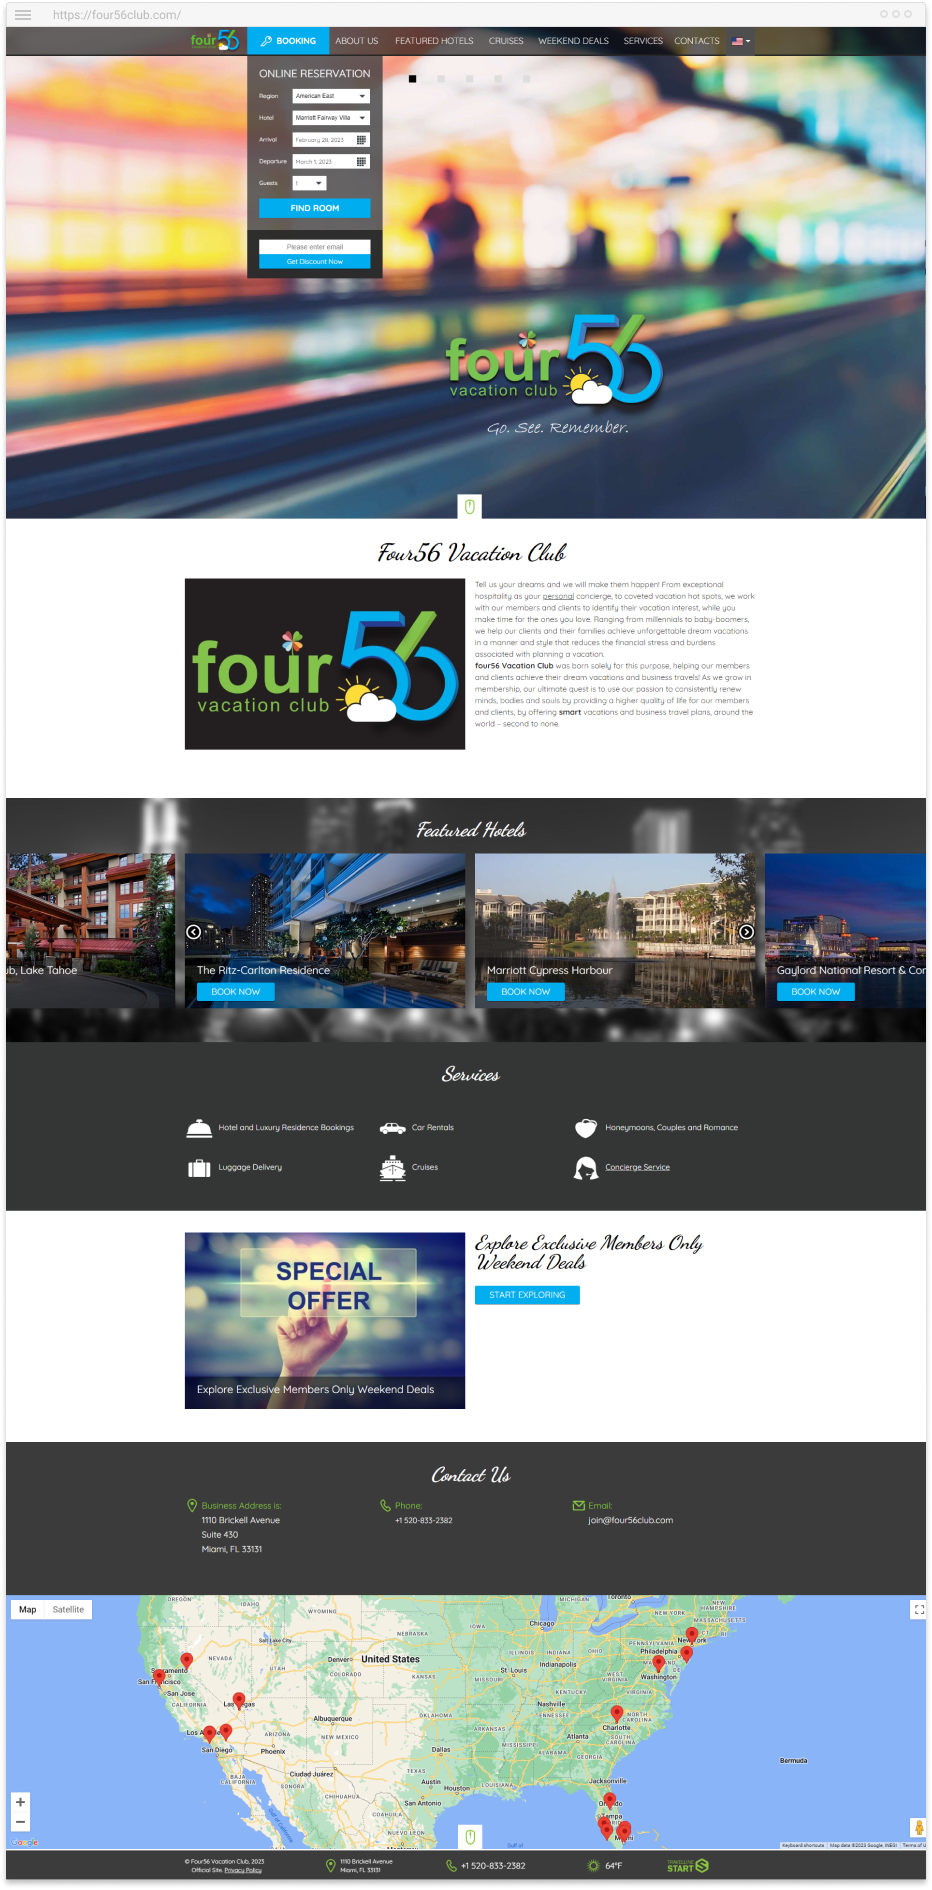 Official site Four56 Vacation Club